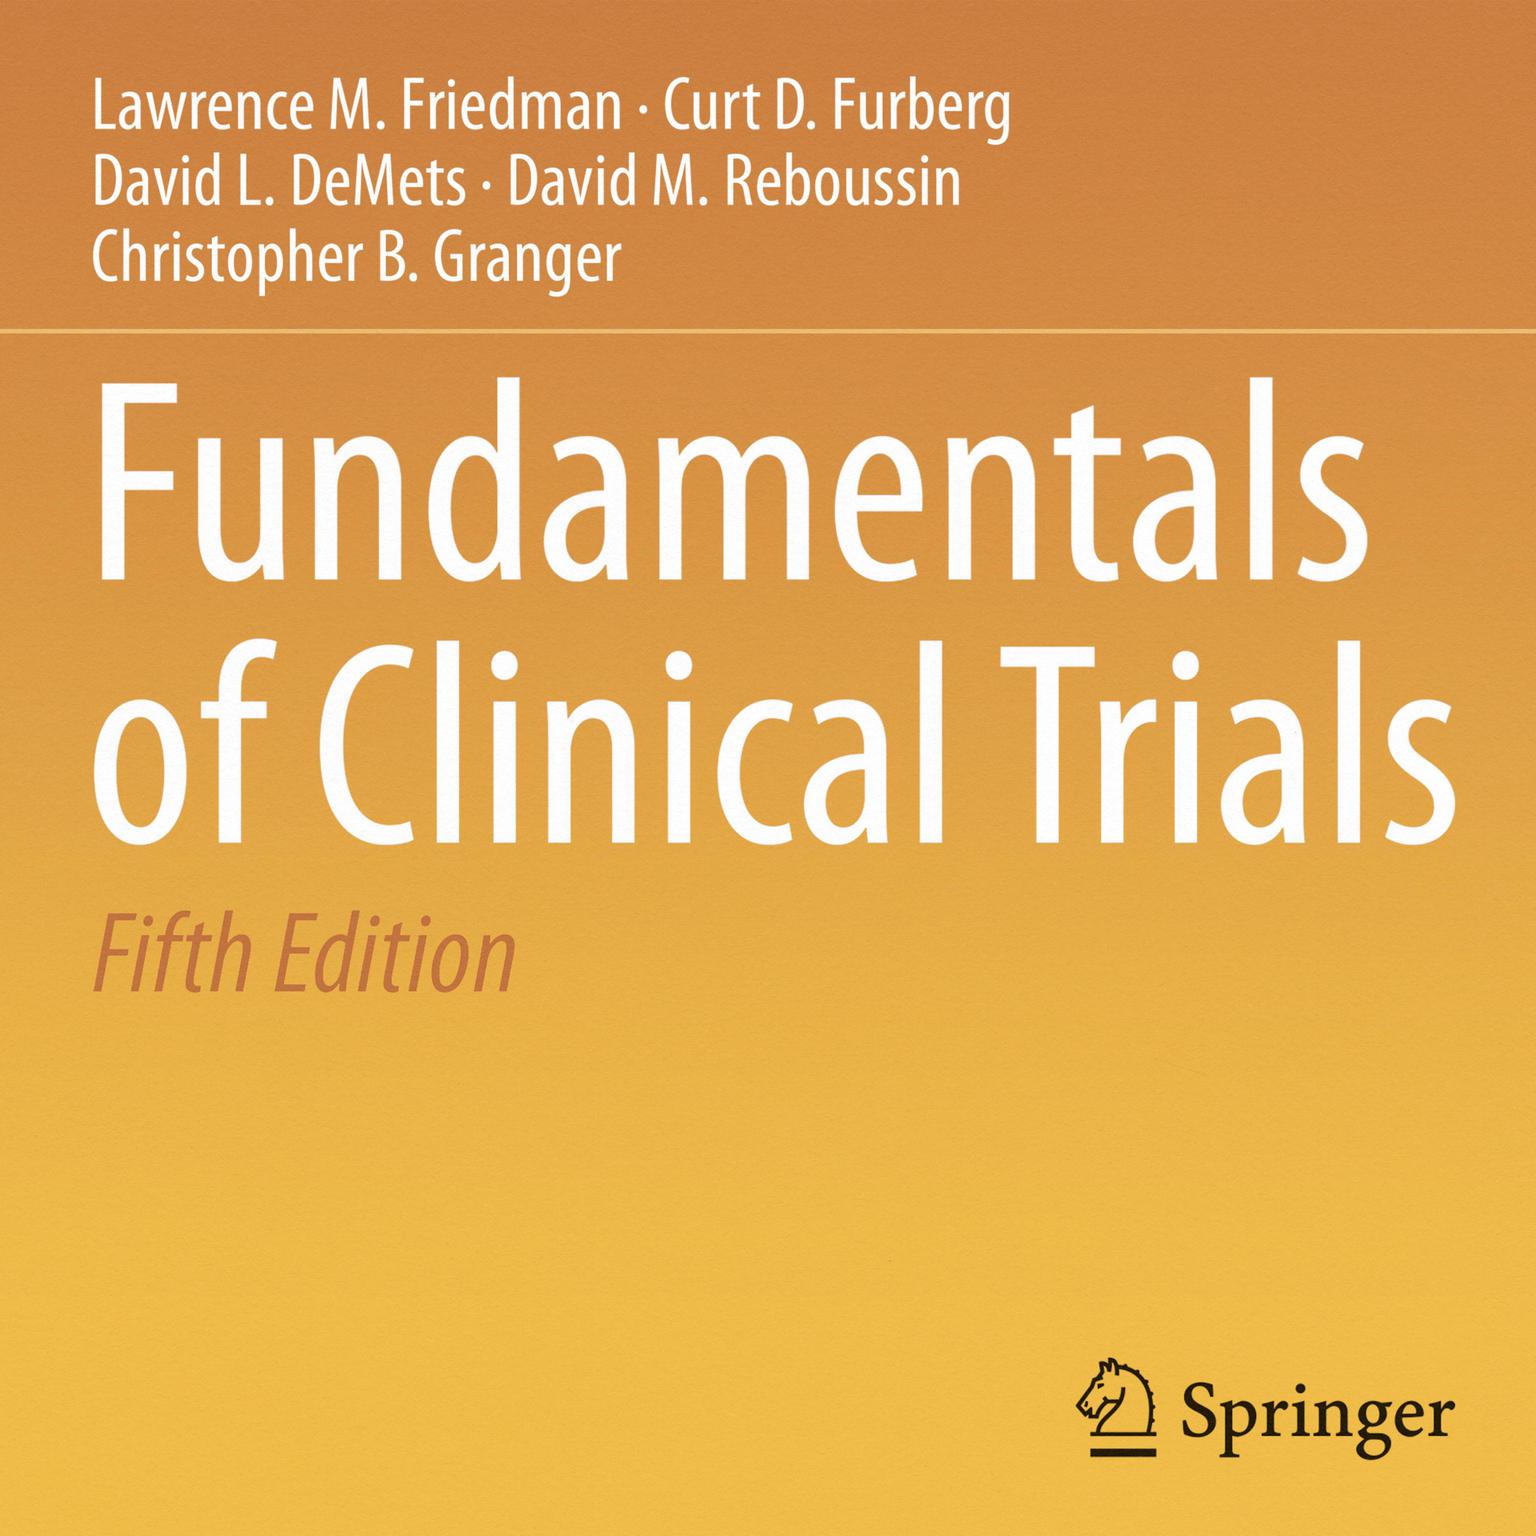 Fundamentals of Clinical Trials (Abridged) Audiobook, by Lawrence M. Friedman